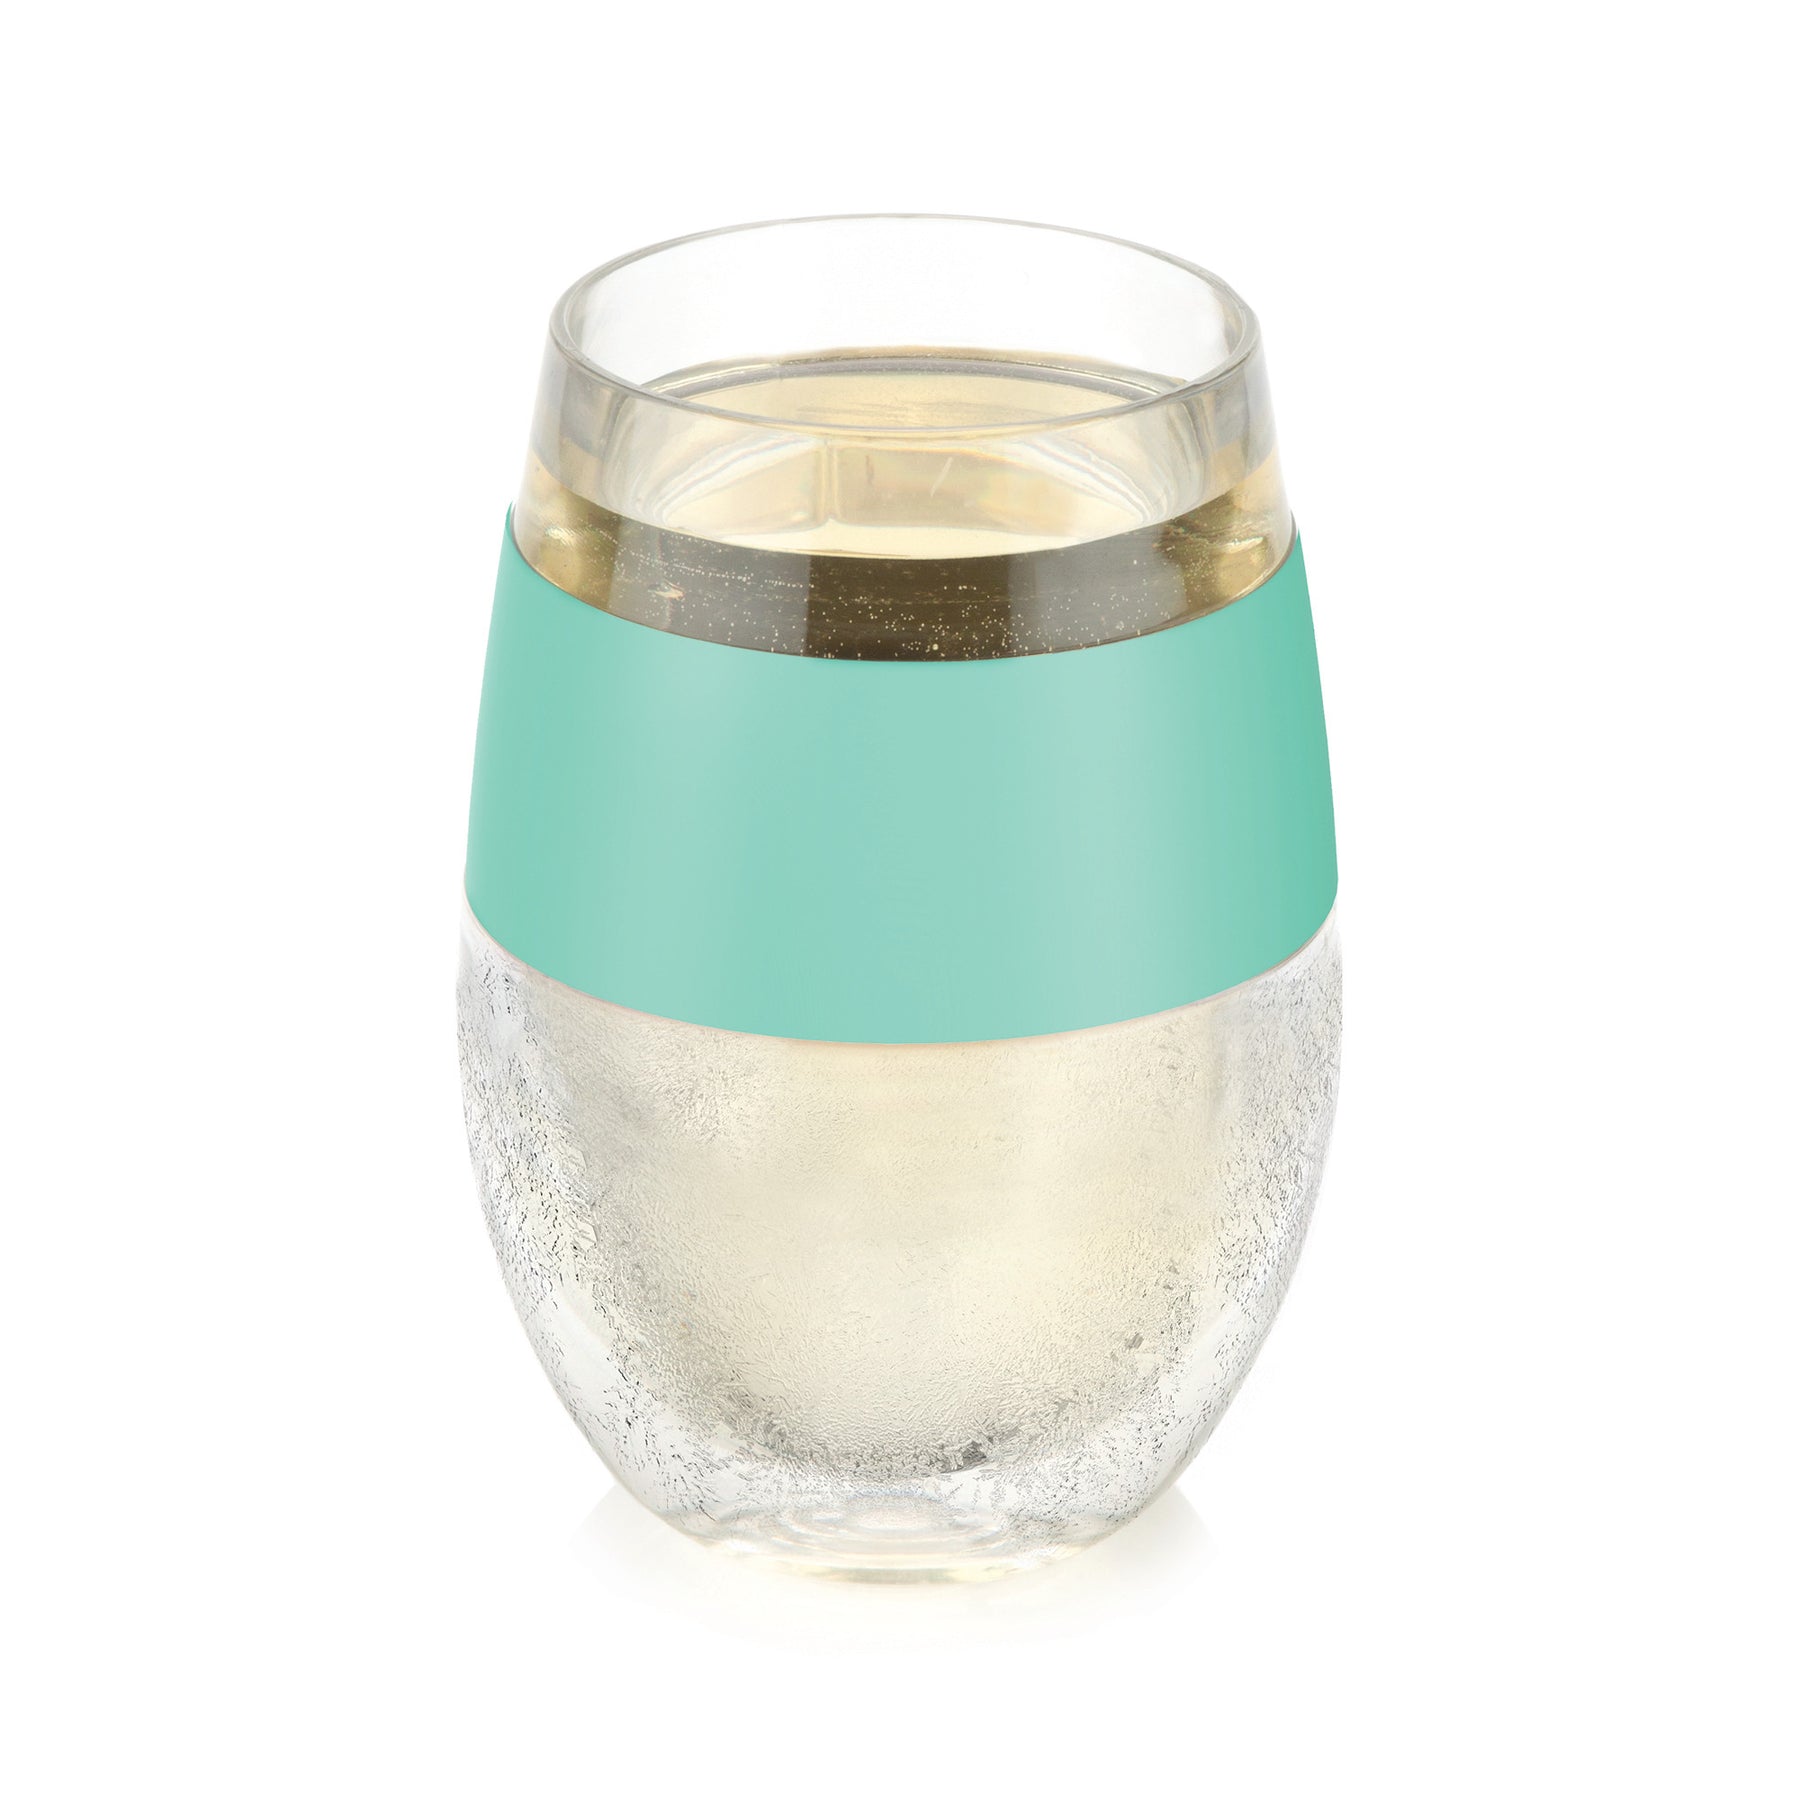 Host Wine Freeze Cooling Cup (Multiple Options Available) - Diament